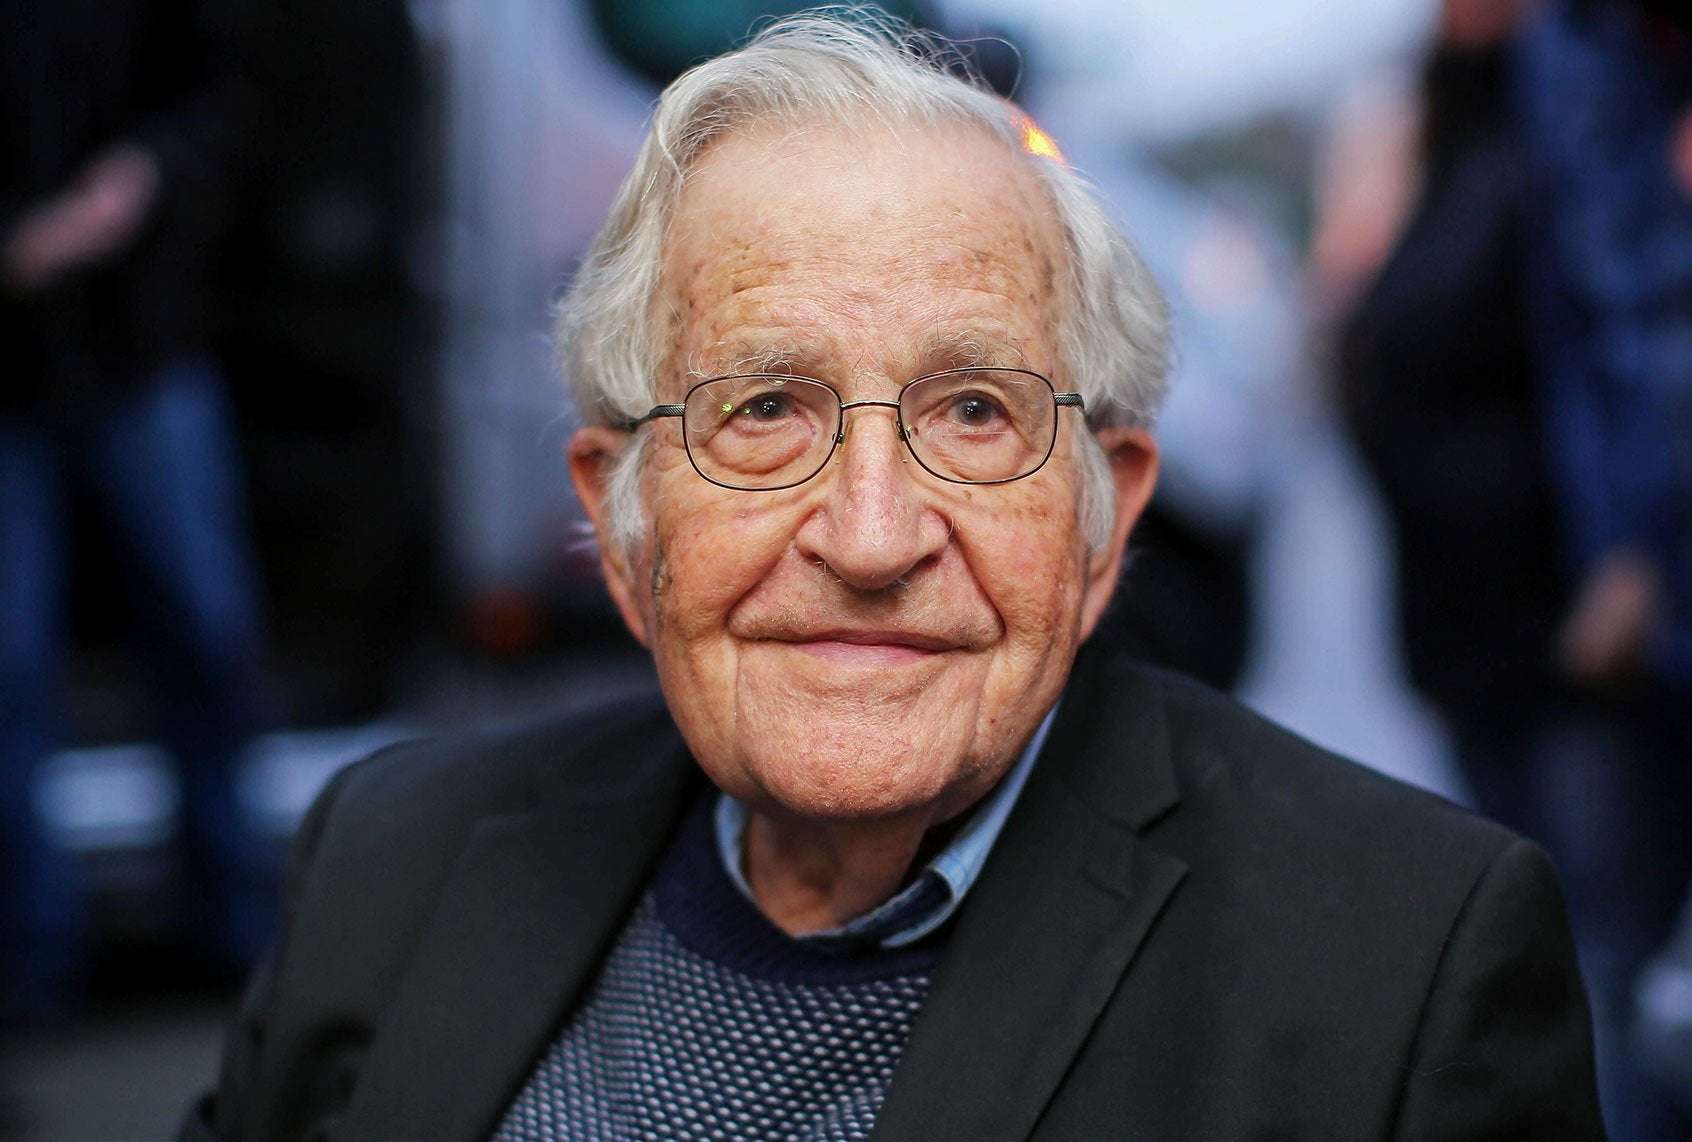 image for Noam Chomsky: "If you don't push the lever for the Democrats, you are assisting Trump"